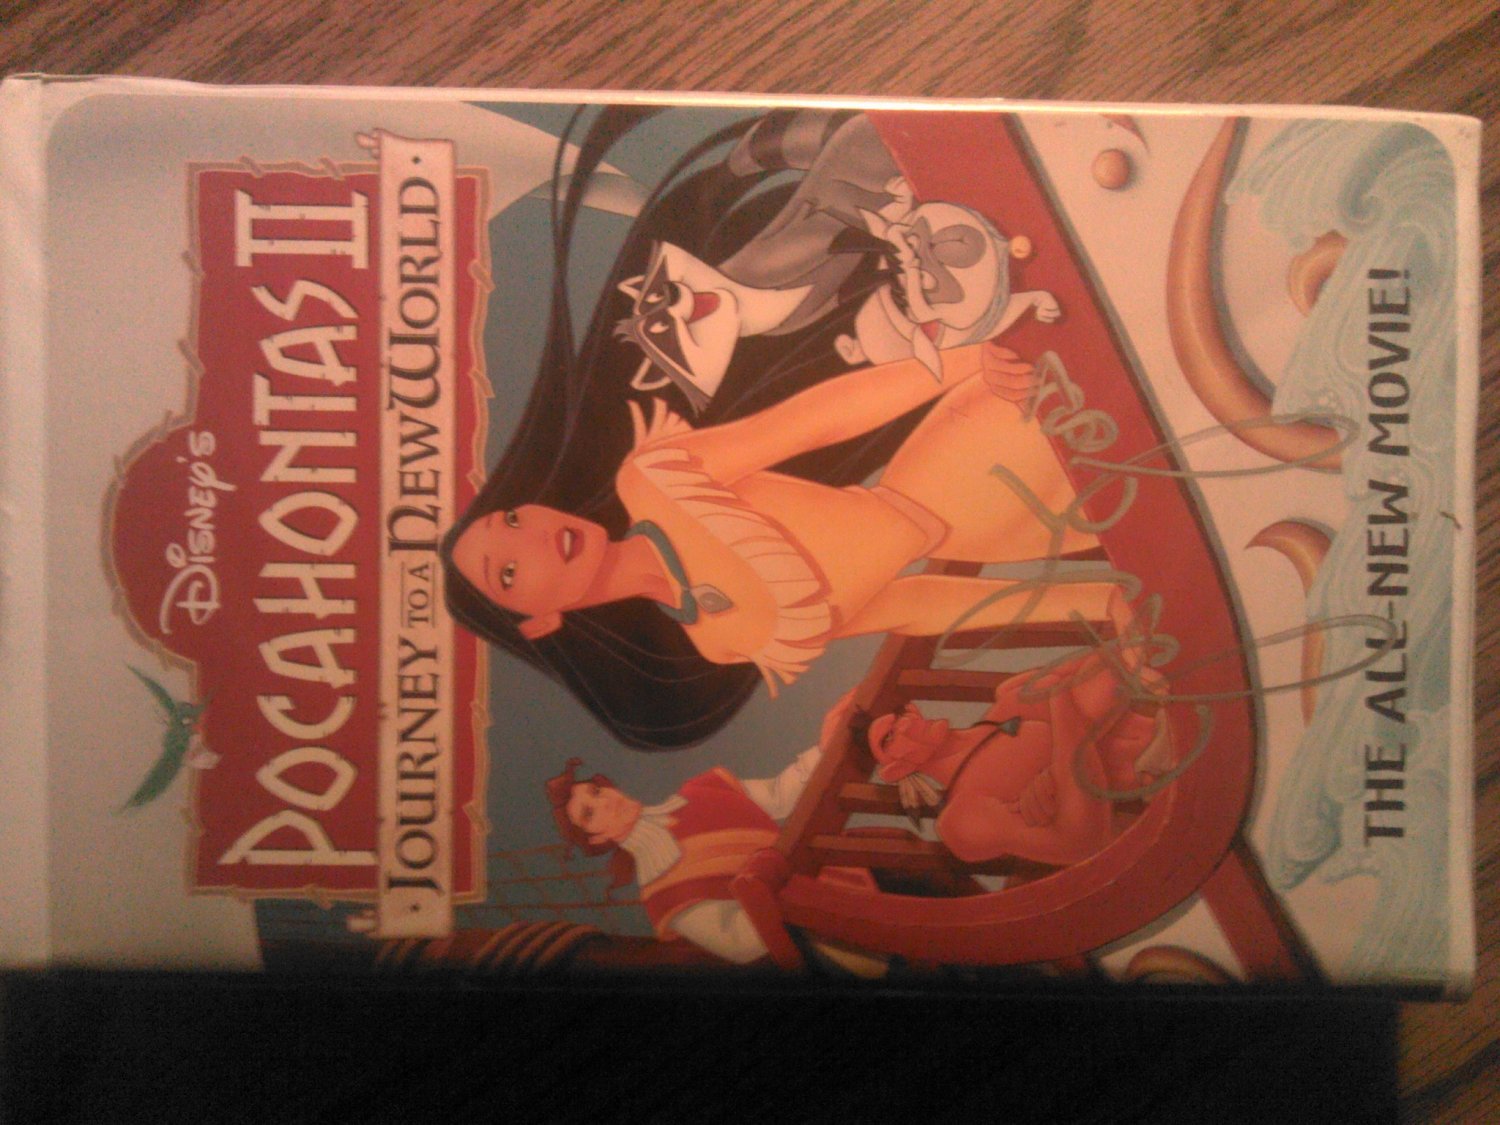 pocahontas 2 journey to a new world vhs